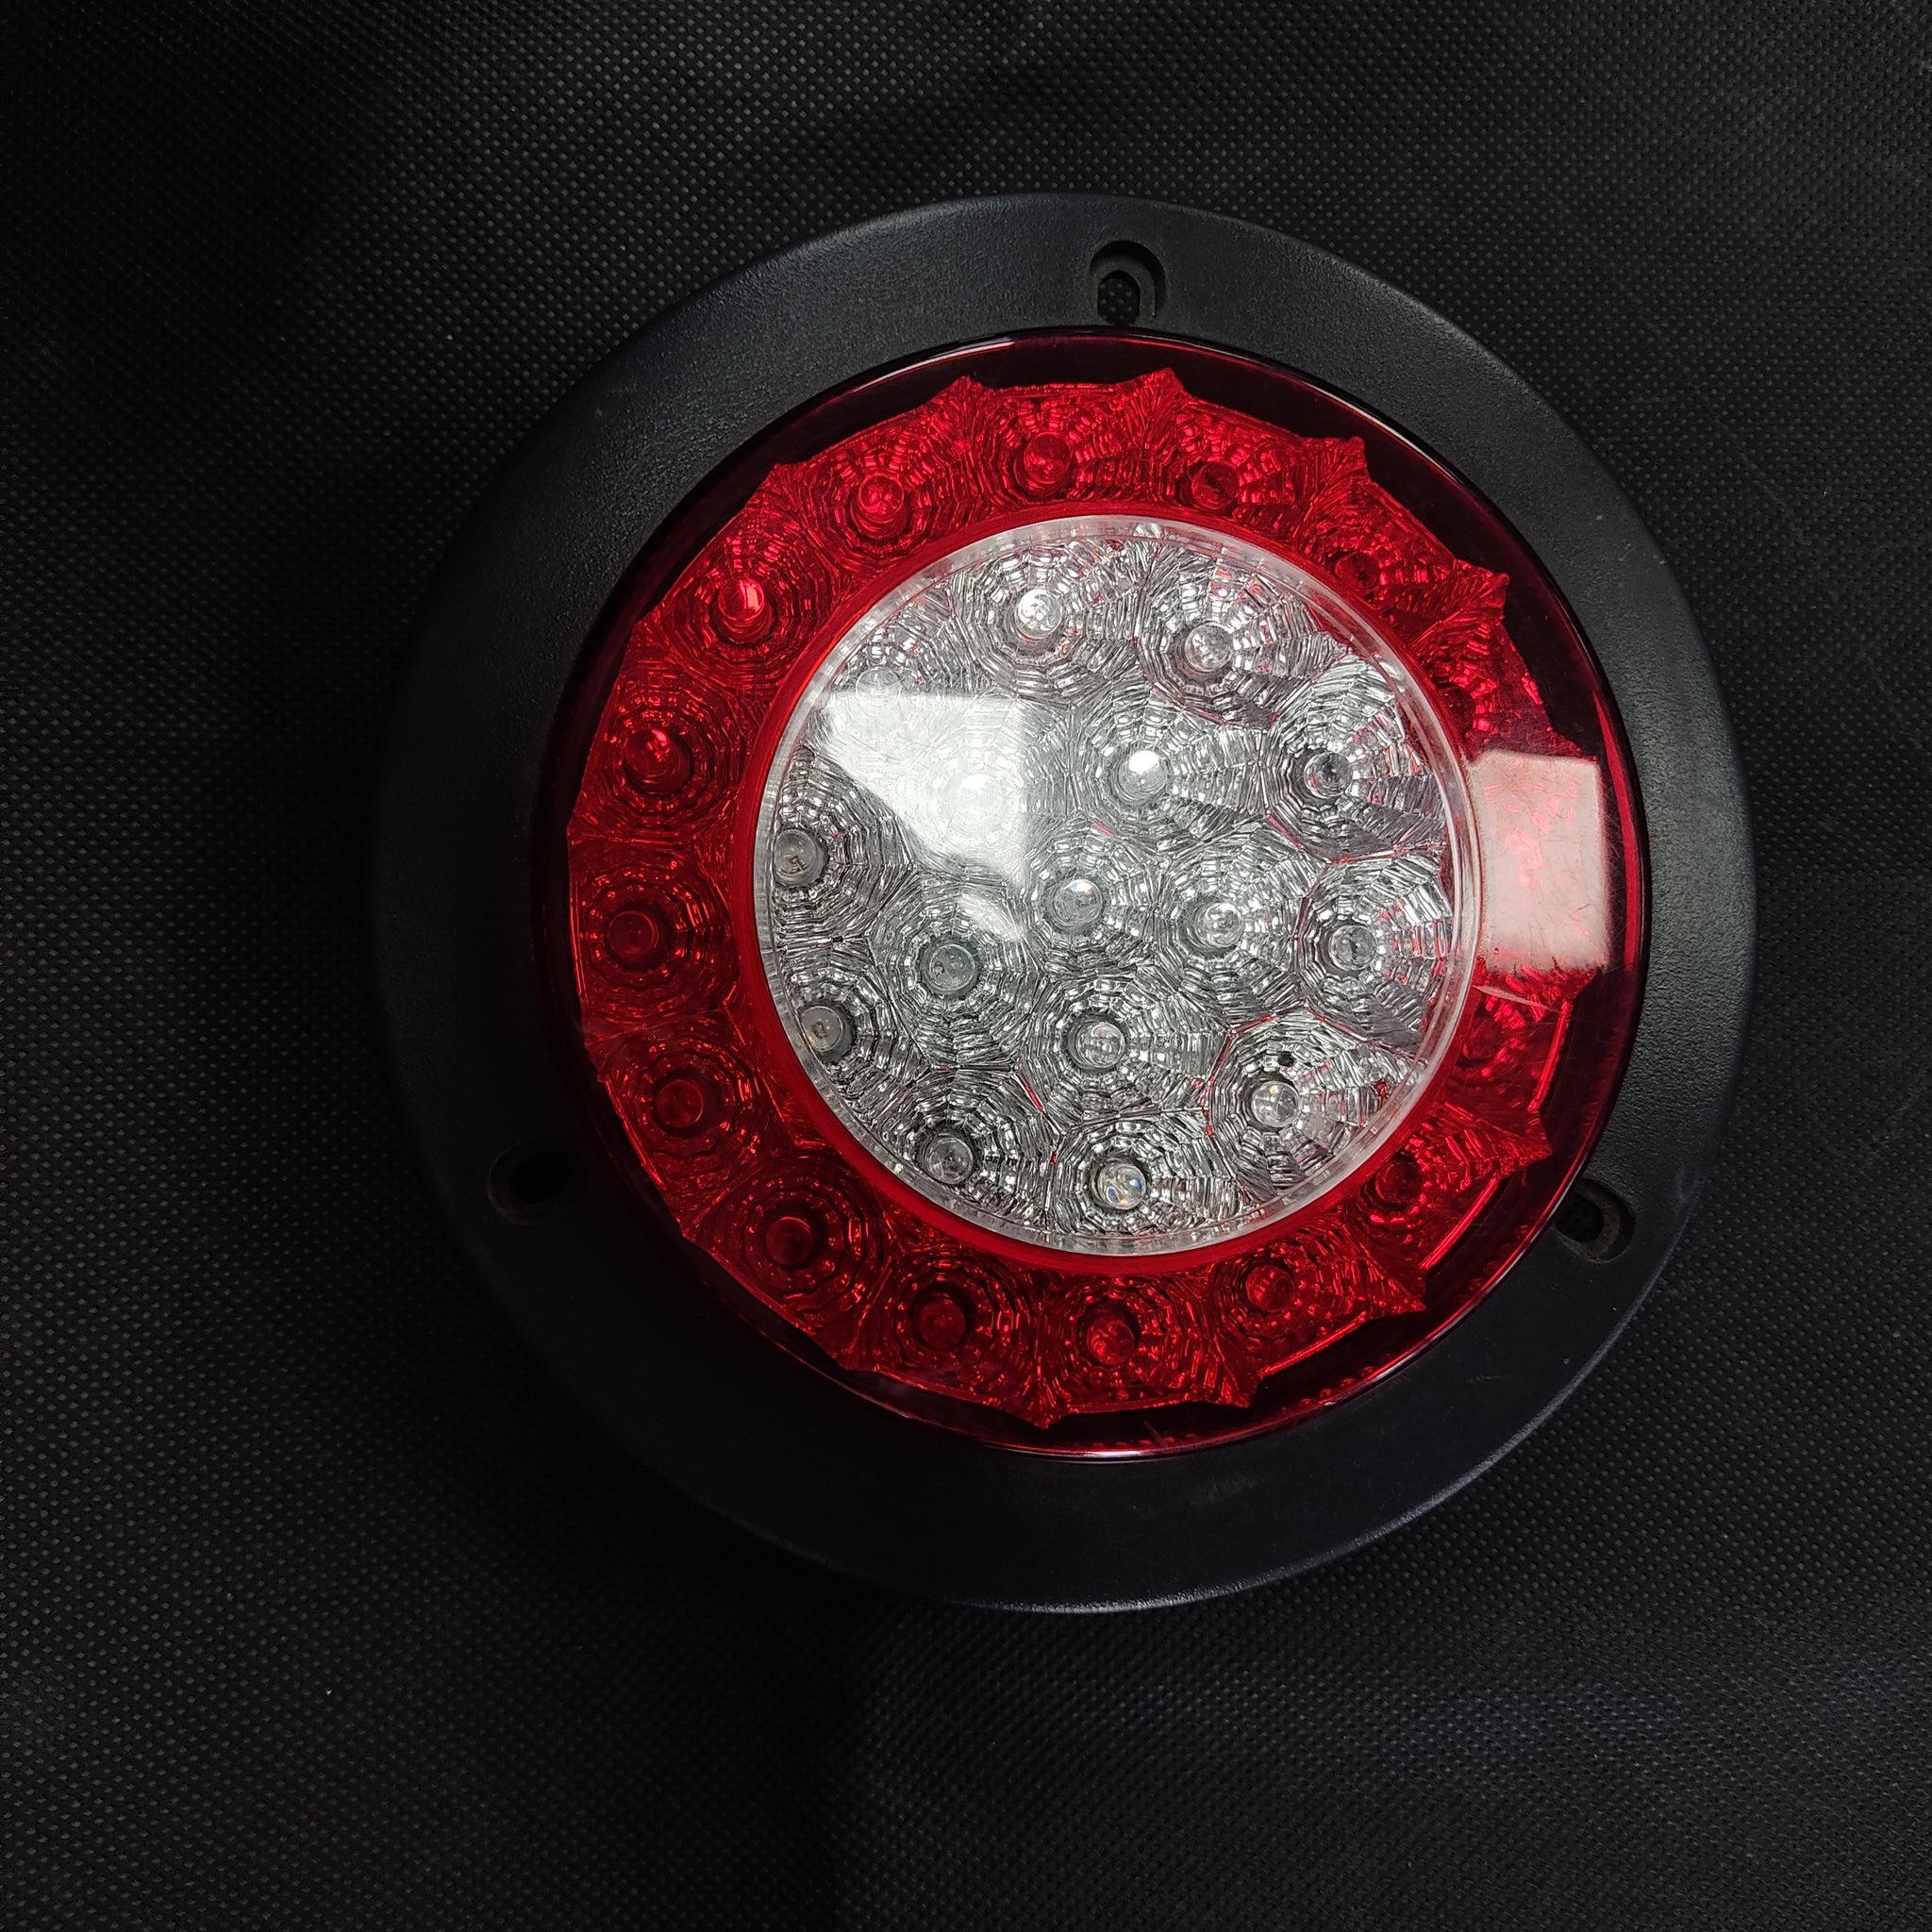 LUZ LED PARA CAMION 44LED 10-30V RED+CLEAR